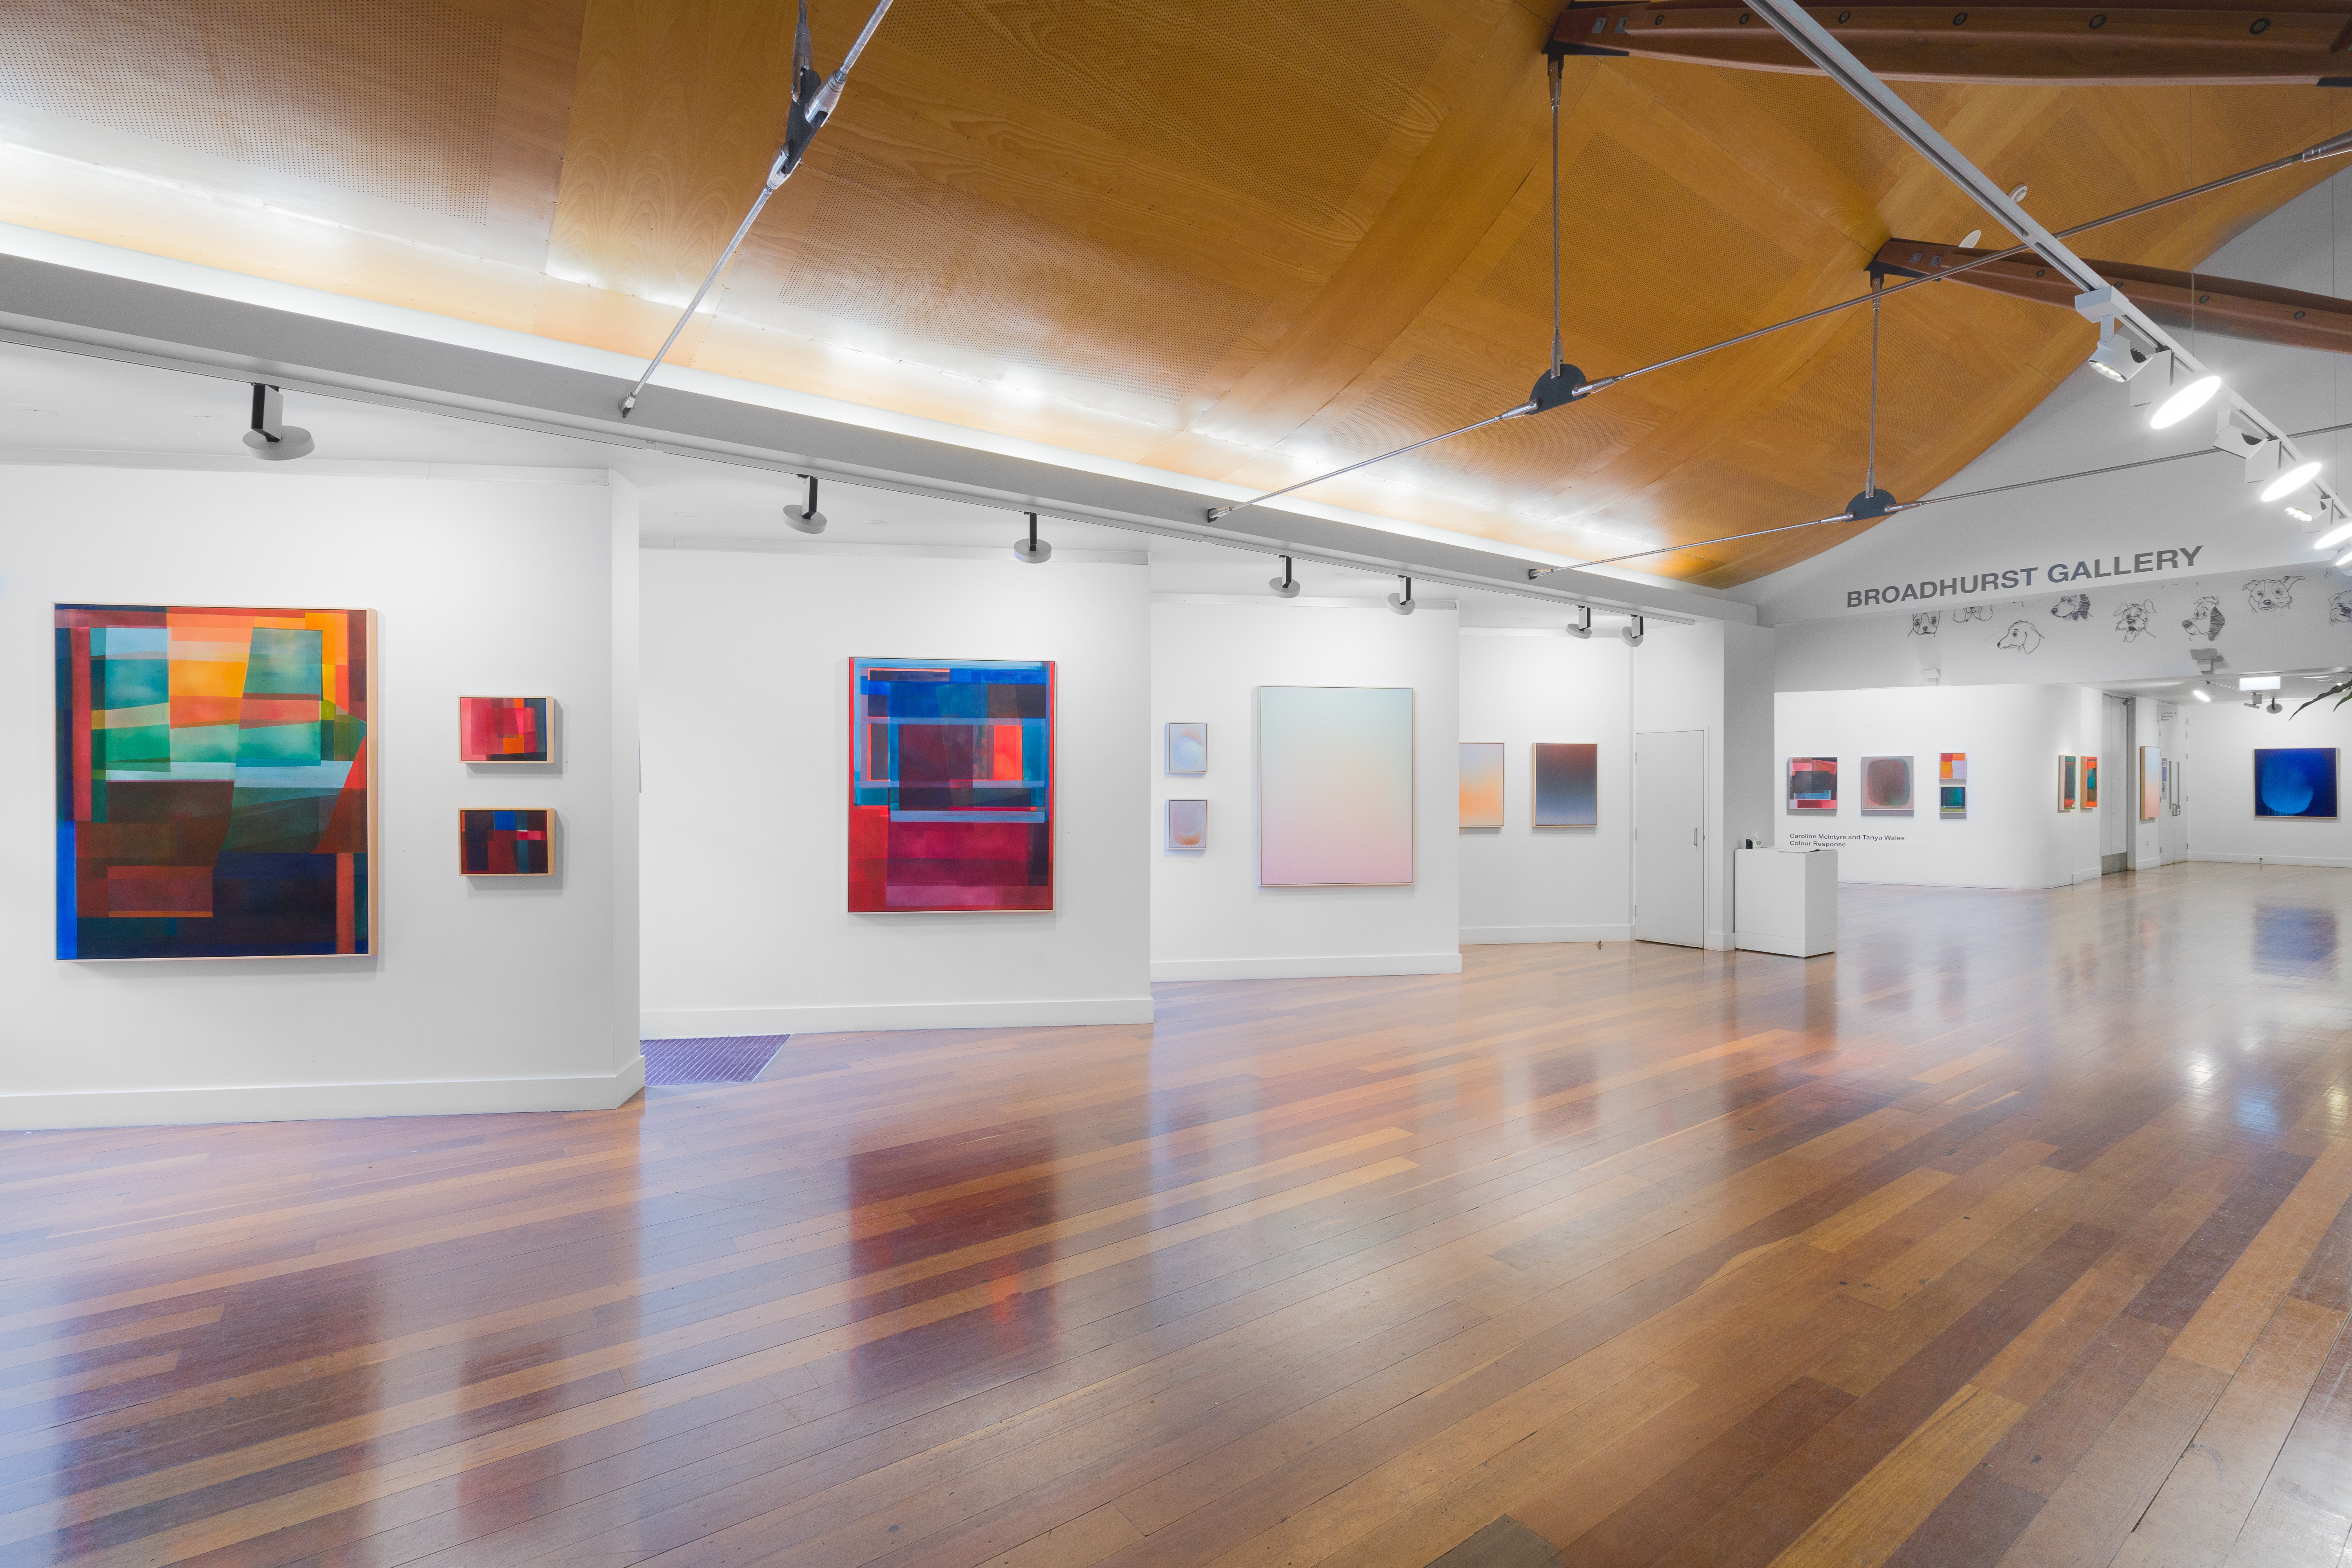 A large gallery space with polished timber flooring. On the walls are several large colour field paintings.